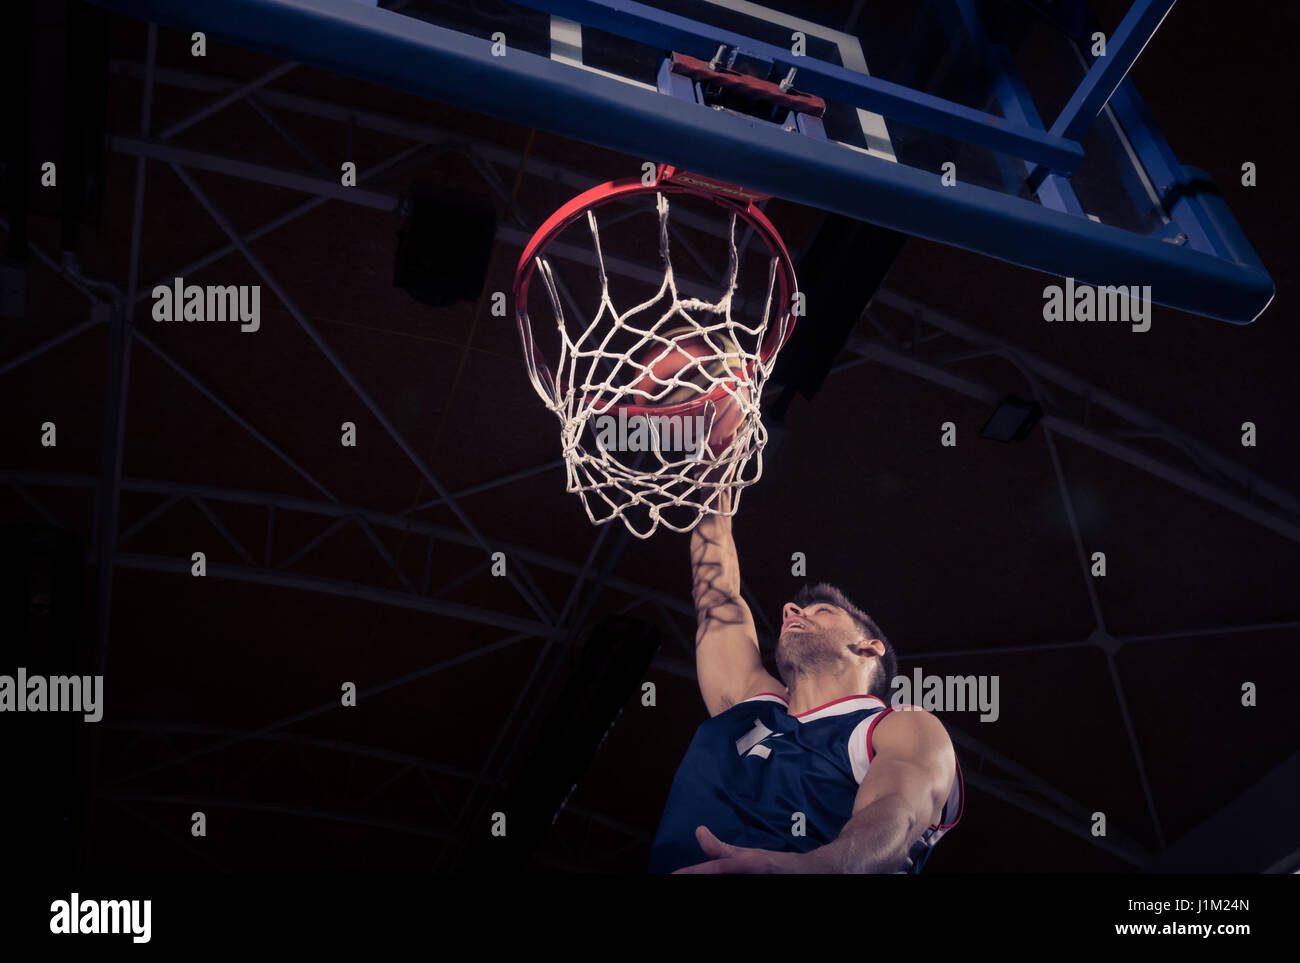 one young adult man, basketball player, one hand, net rim, low angle view, slam dunk, dark indoors. Stock Photo